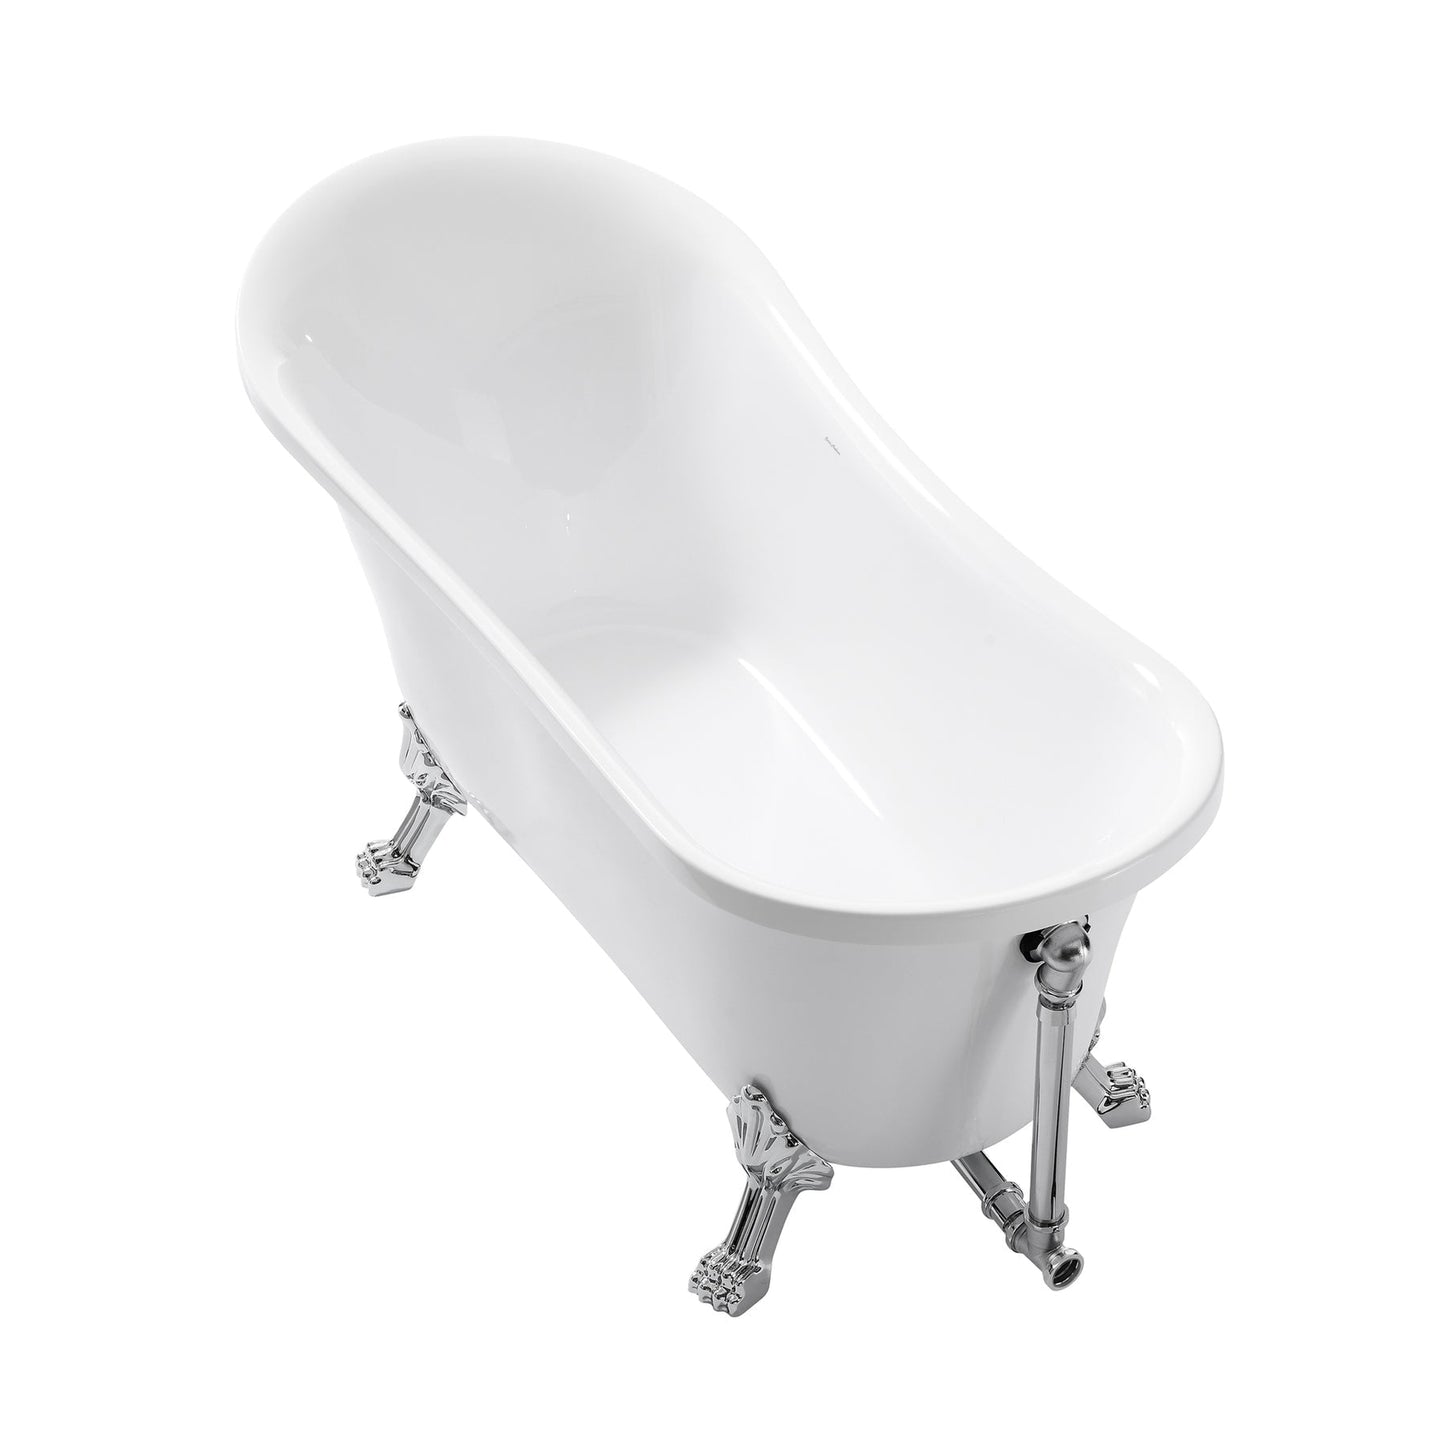 Swiss Madison Caché 63" x 29" White Right-Hand Drain Freestanding Bathtub With Adjustable Chrome Clawfoot Feet, Overflow Kit and Pop-Up Drain